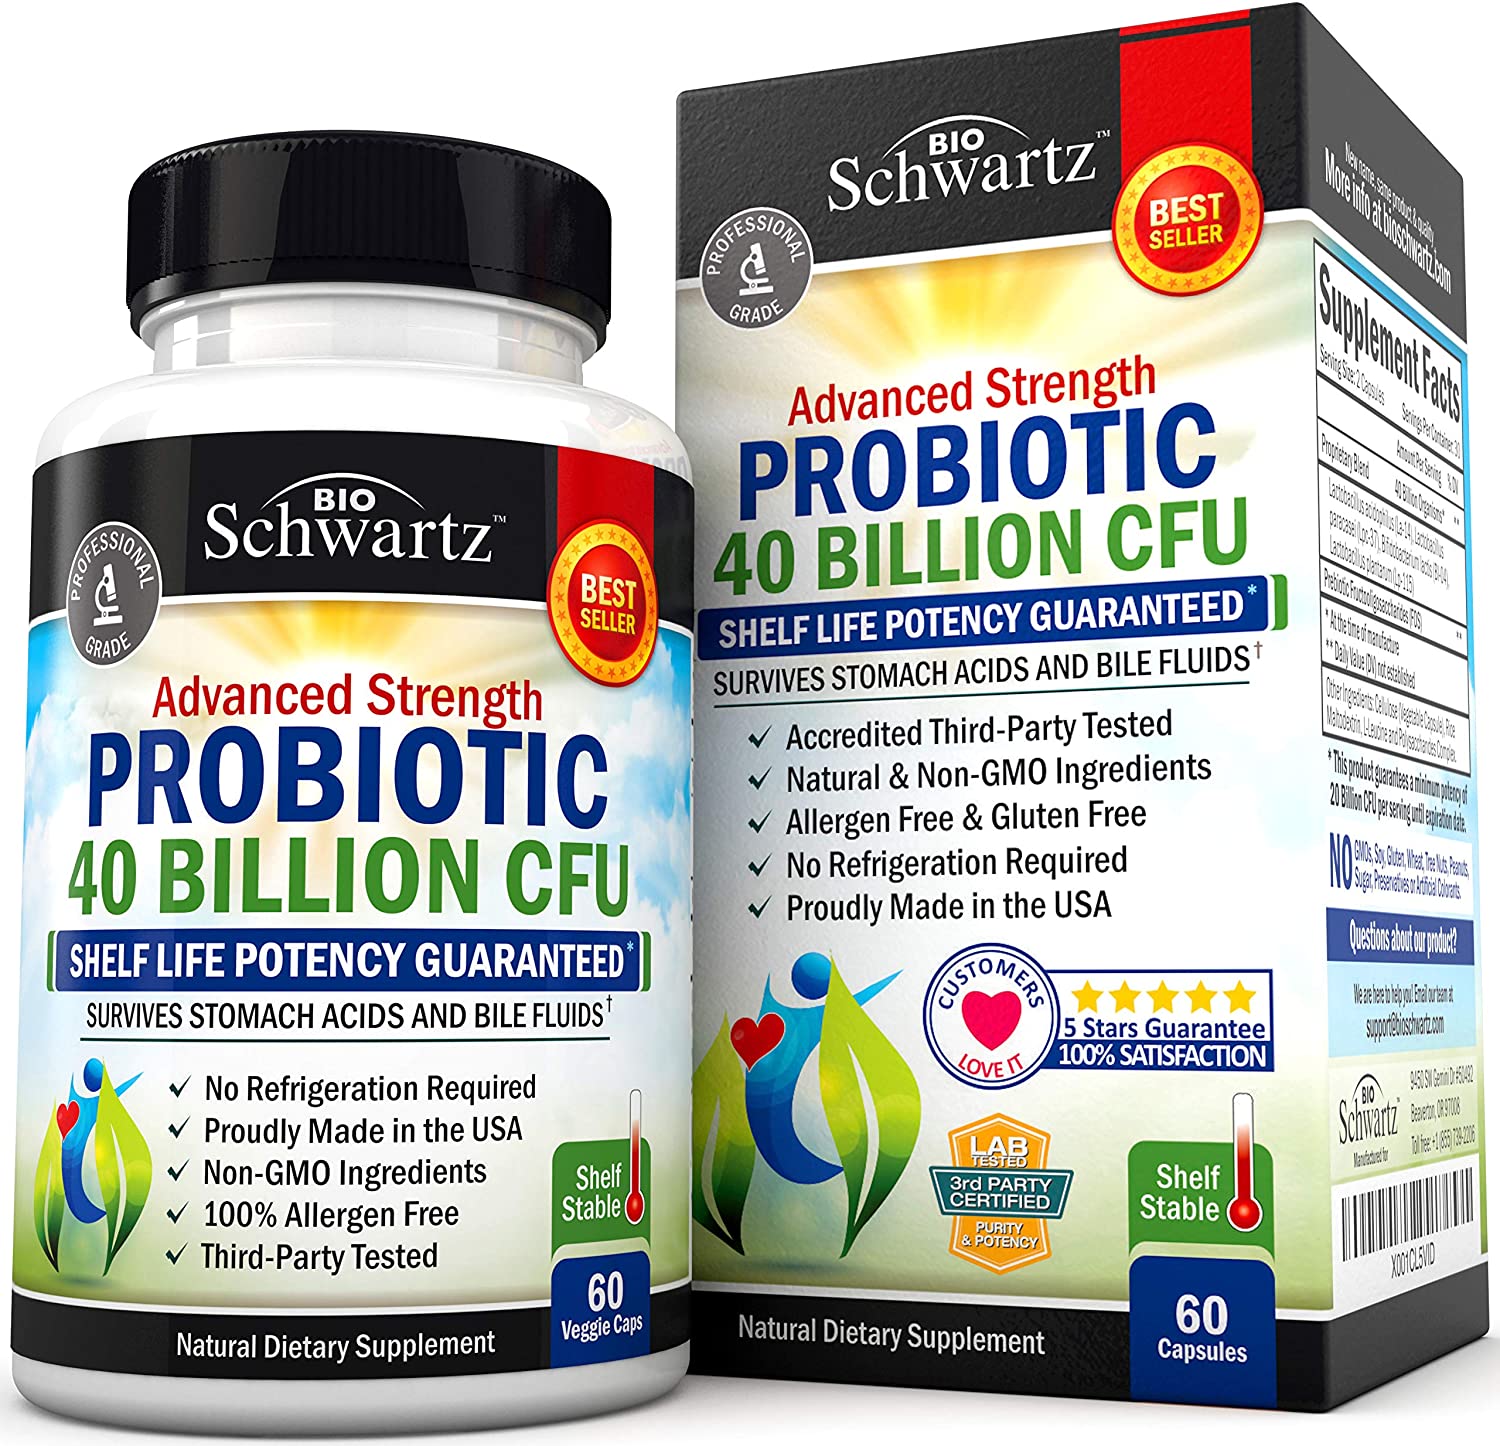 A Review of Bioschwartz Probiotic : Is It good for Health?